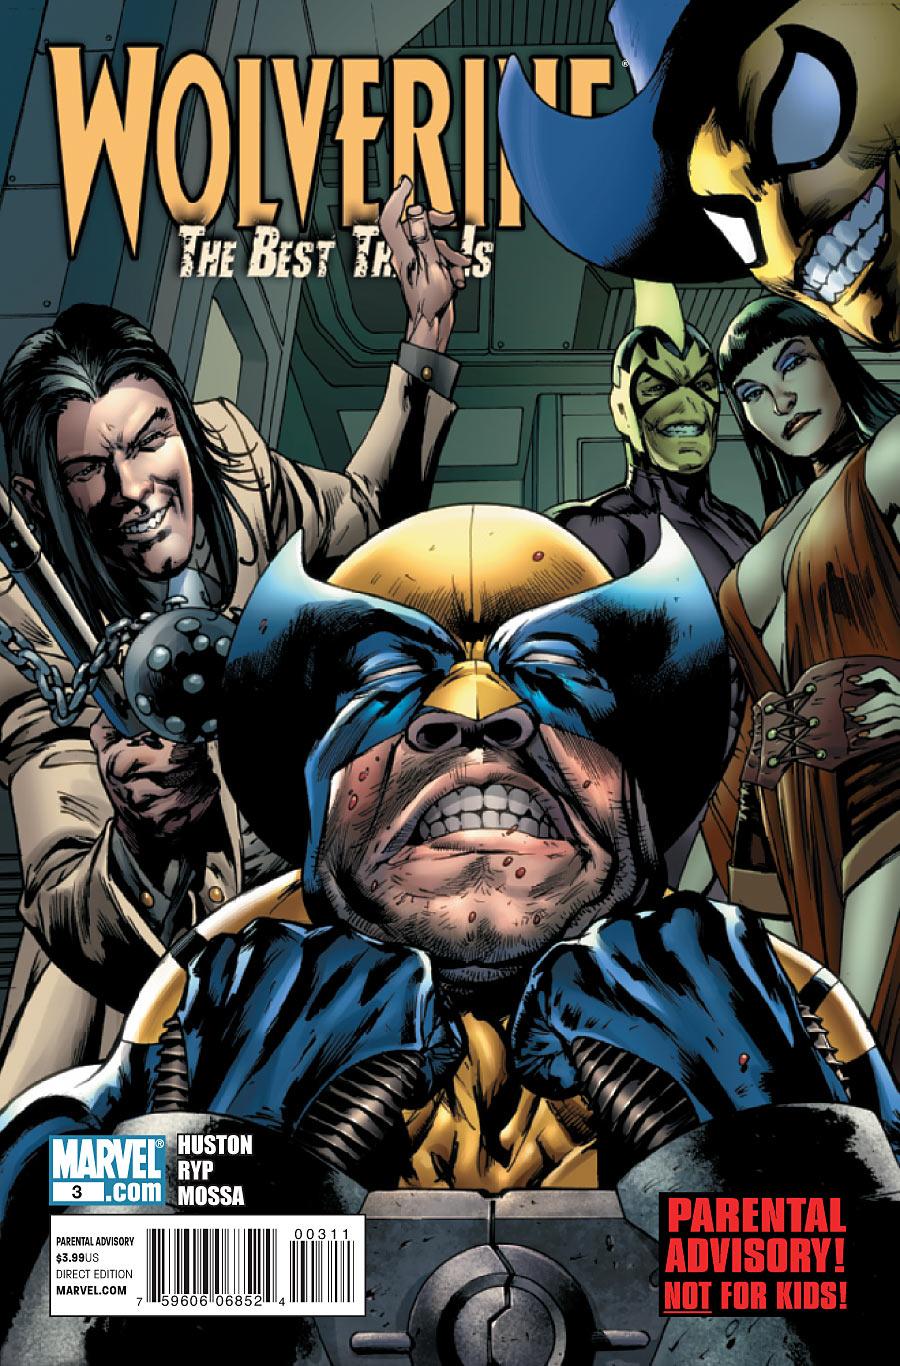 Wolverine: The Best There Is Vol. 1 #3